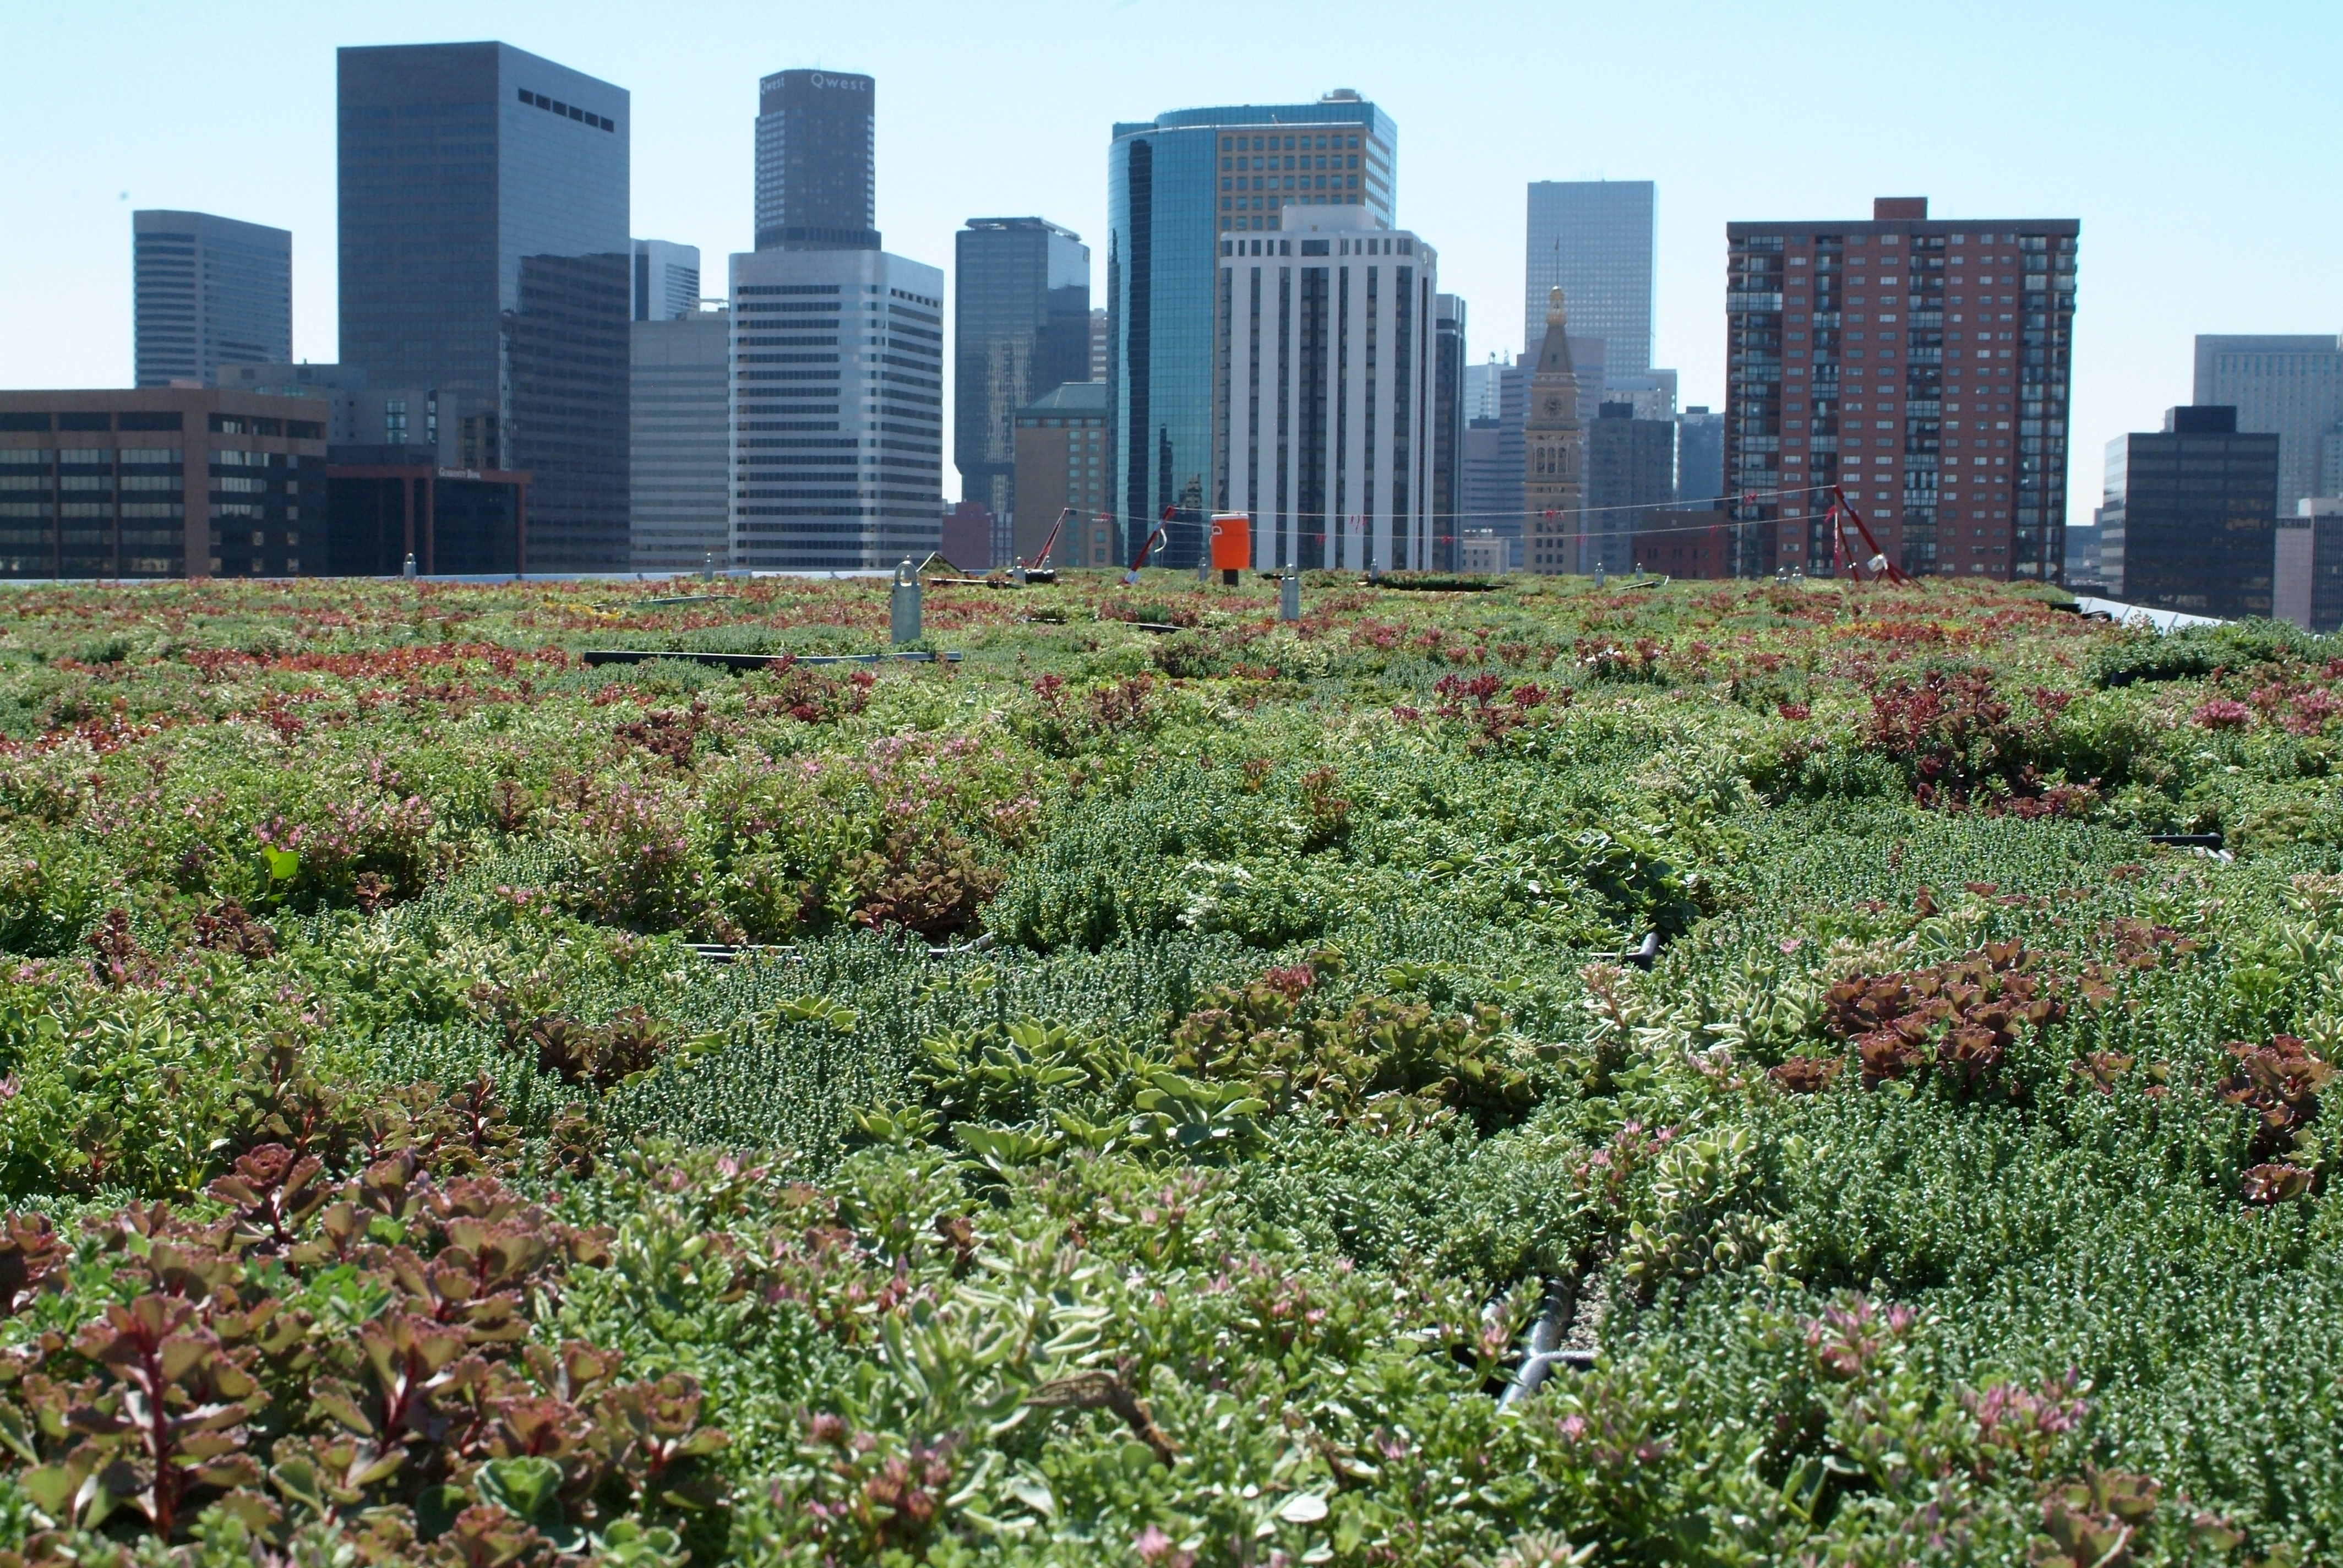 A garden on top of a roof with downtown Denver skyline in the background.